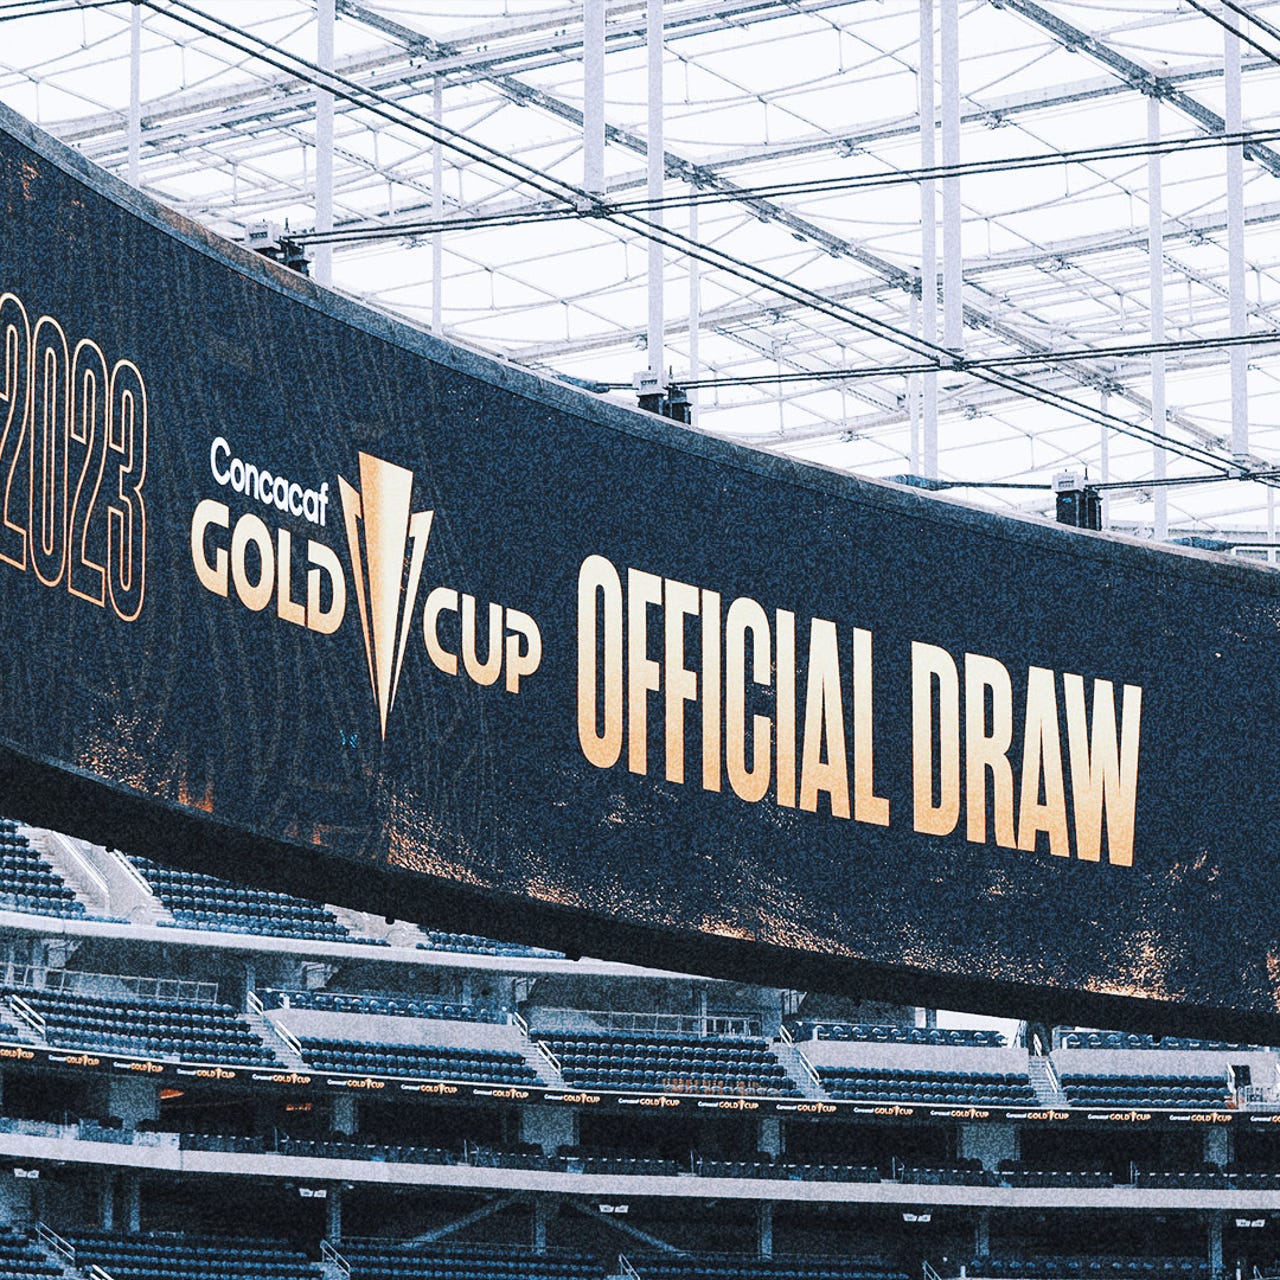 2023 CONCACAF Gold Cup - Group D Preview - Stars and Stripes FC